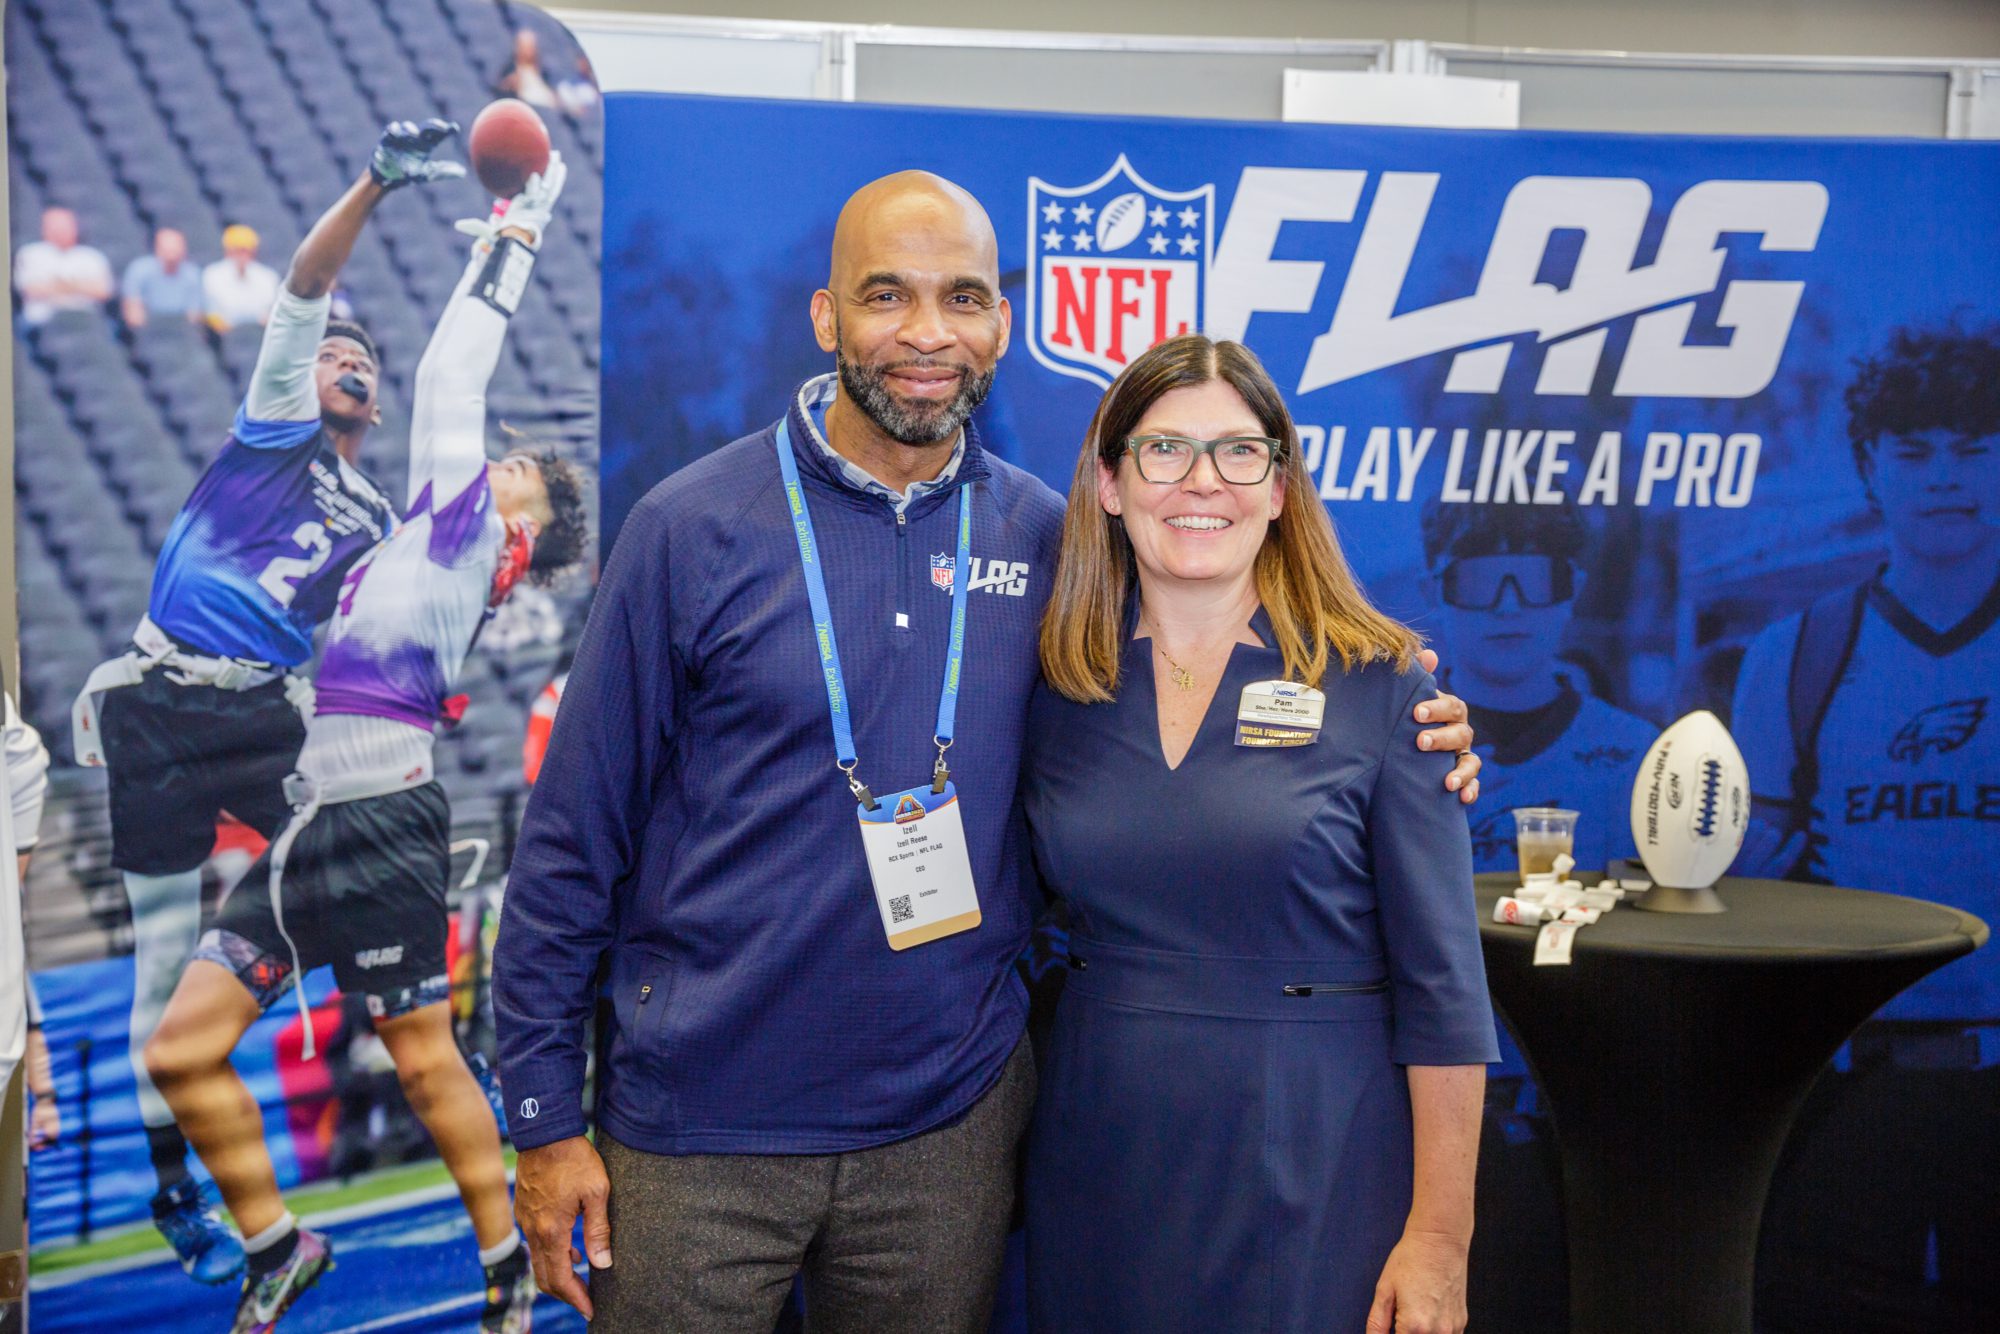 Two people standing in front of NFL Flag booth